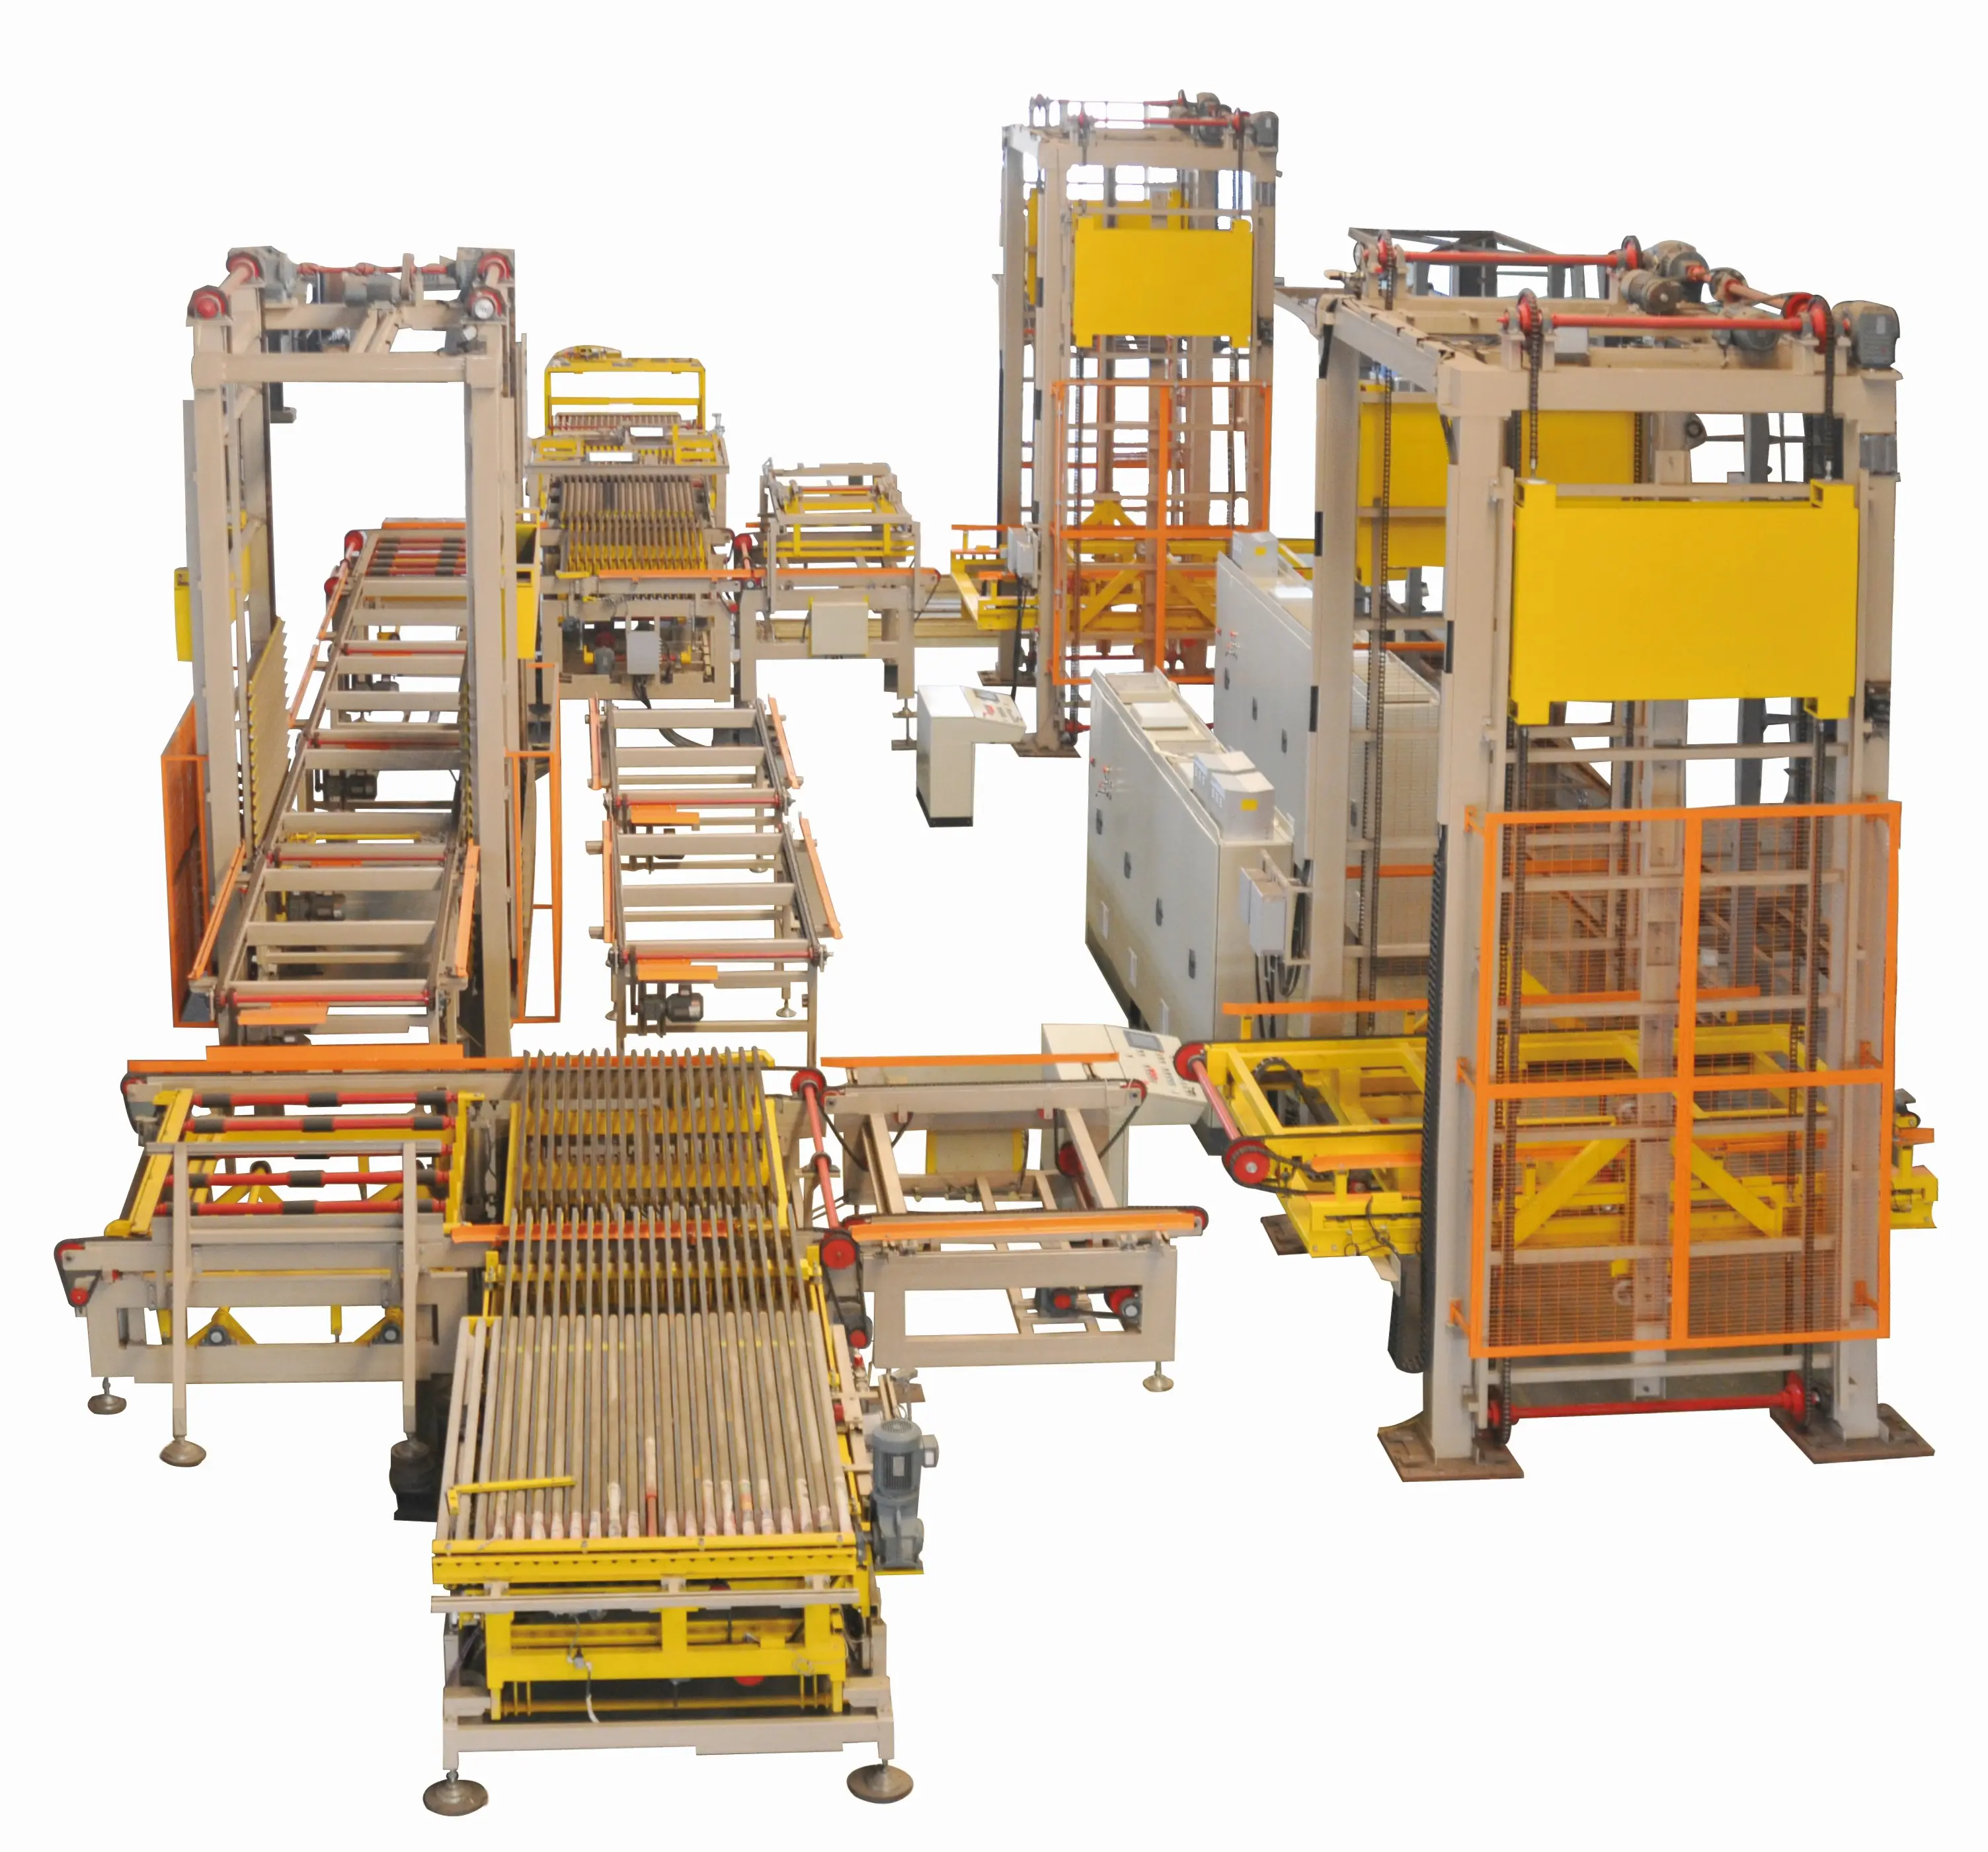 Dryer pallet Loading and unloading brick stacking system